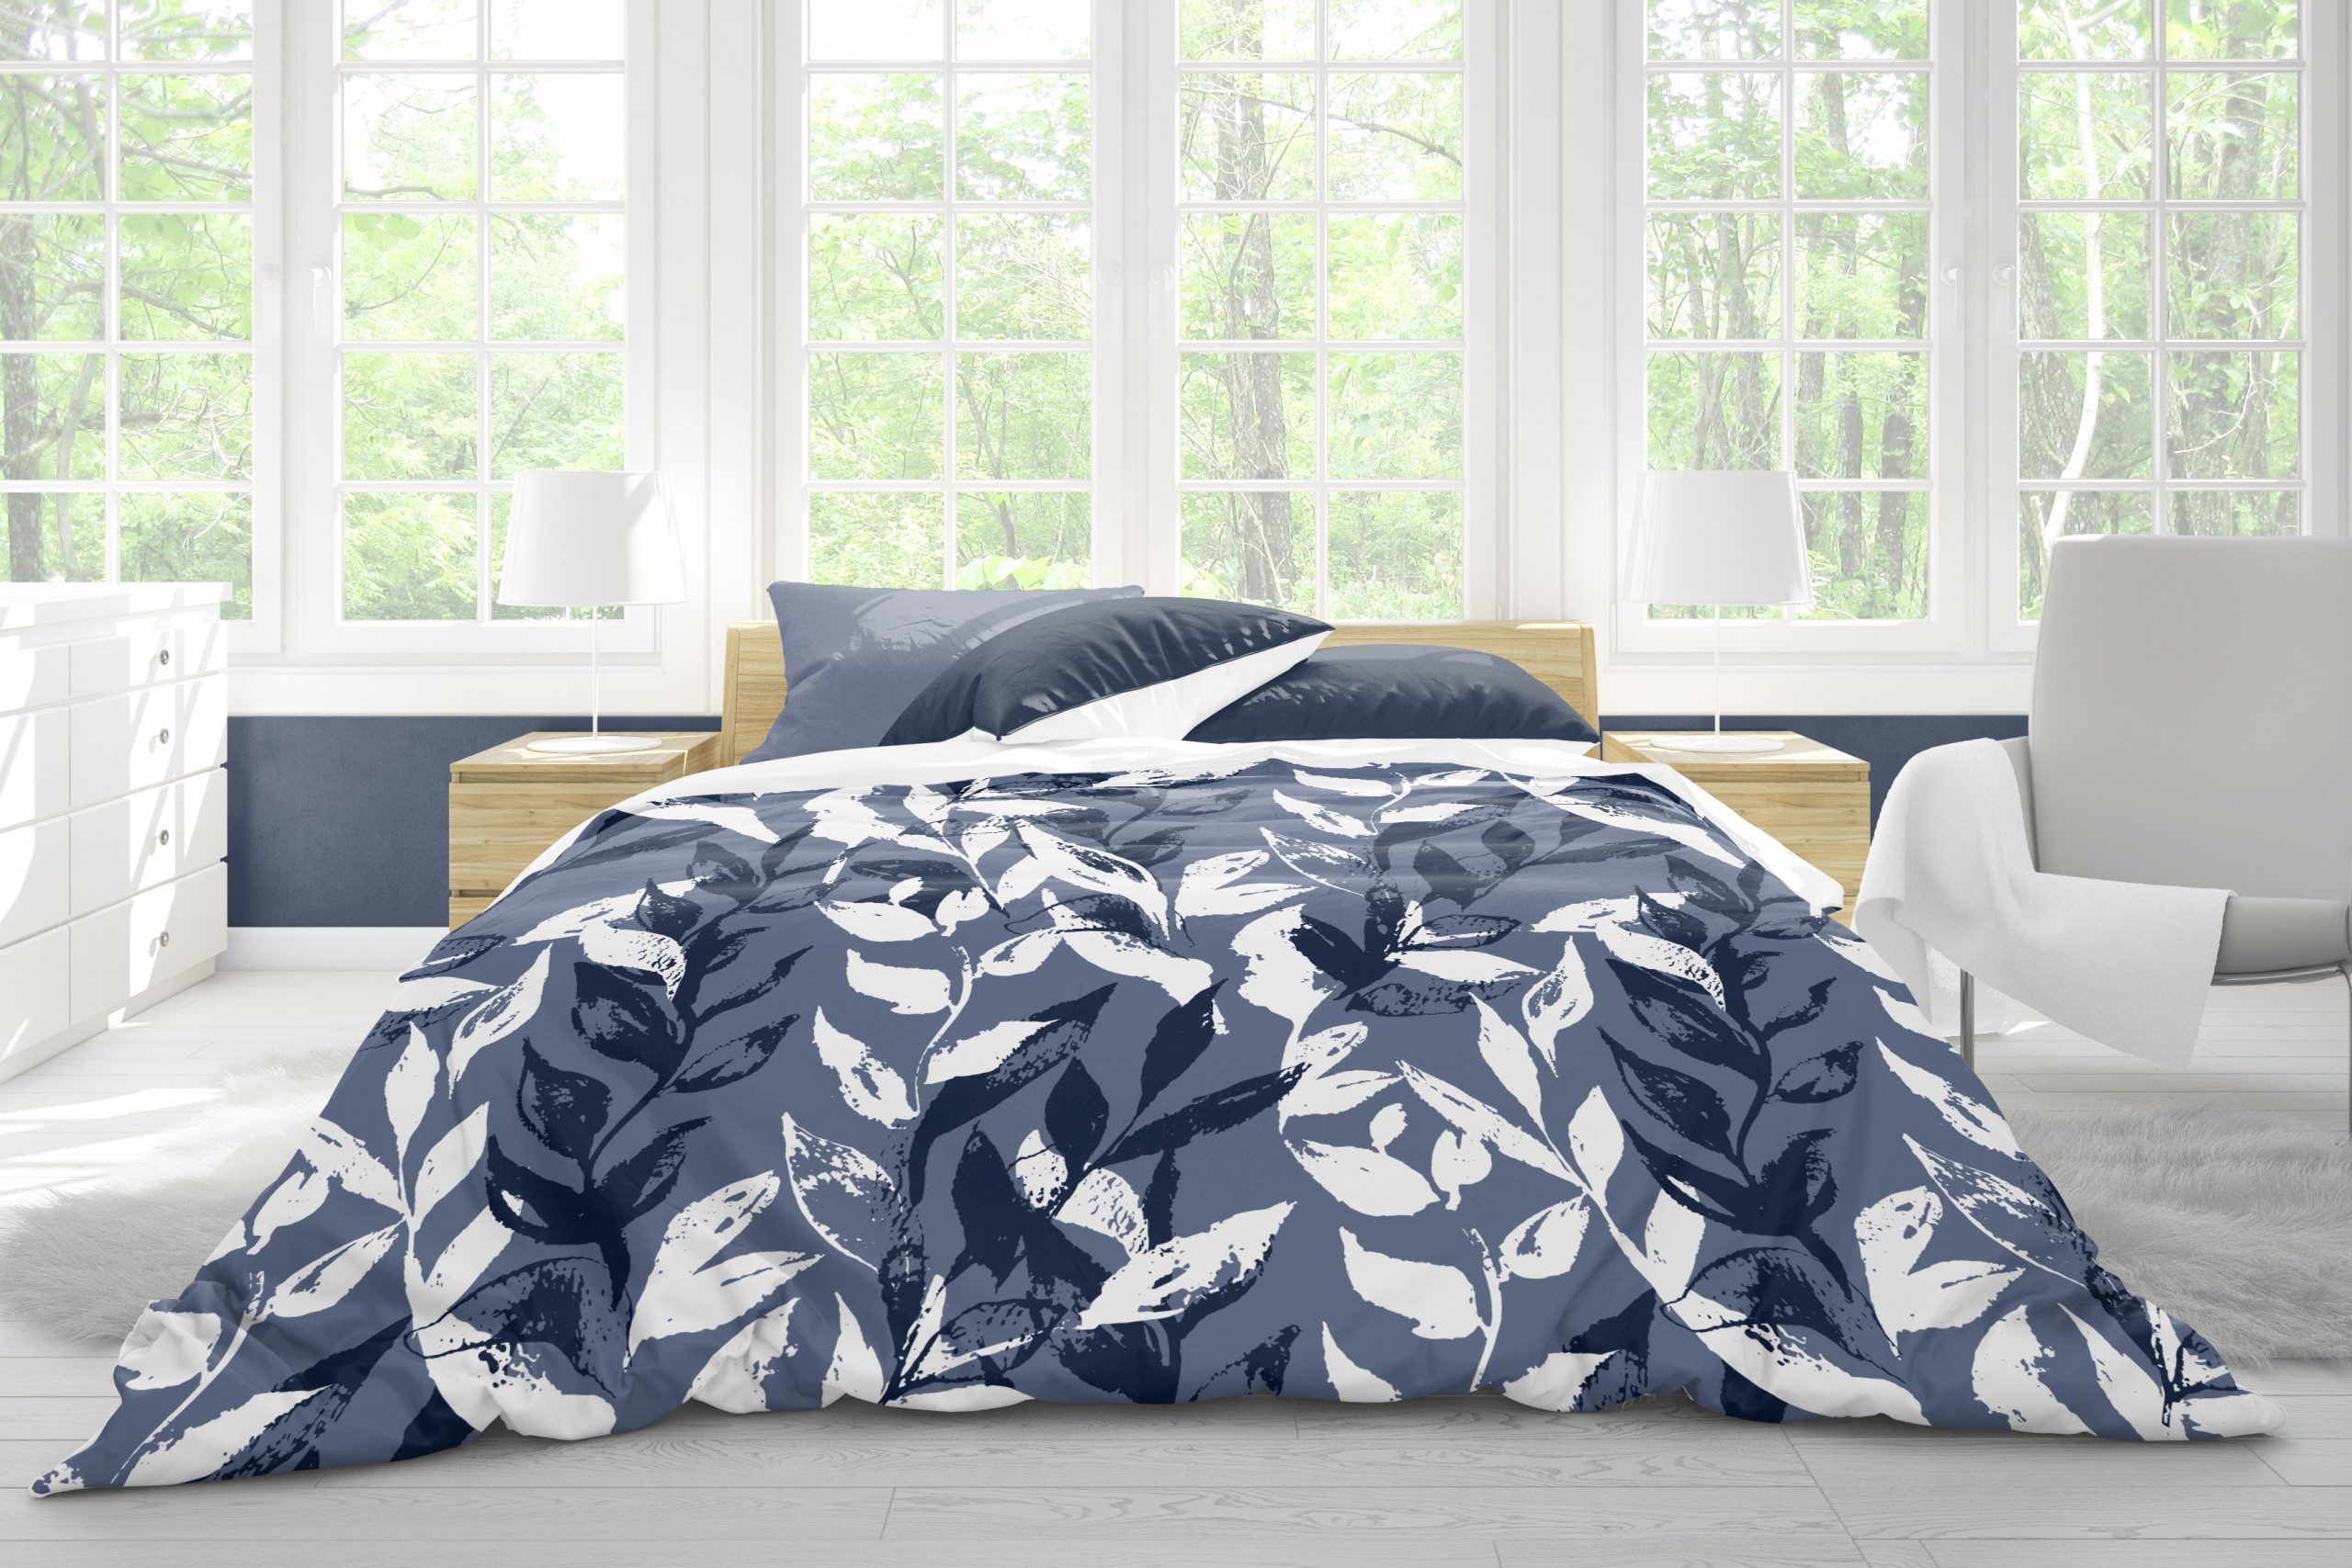 You are currently viewing The Art of Bedding: Choosing the Perfect Duvet Cover